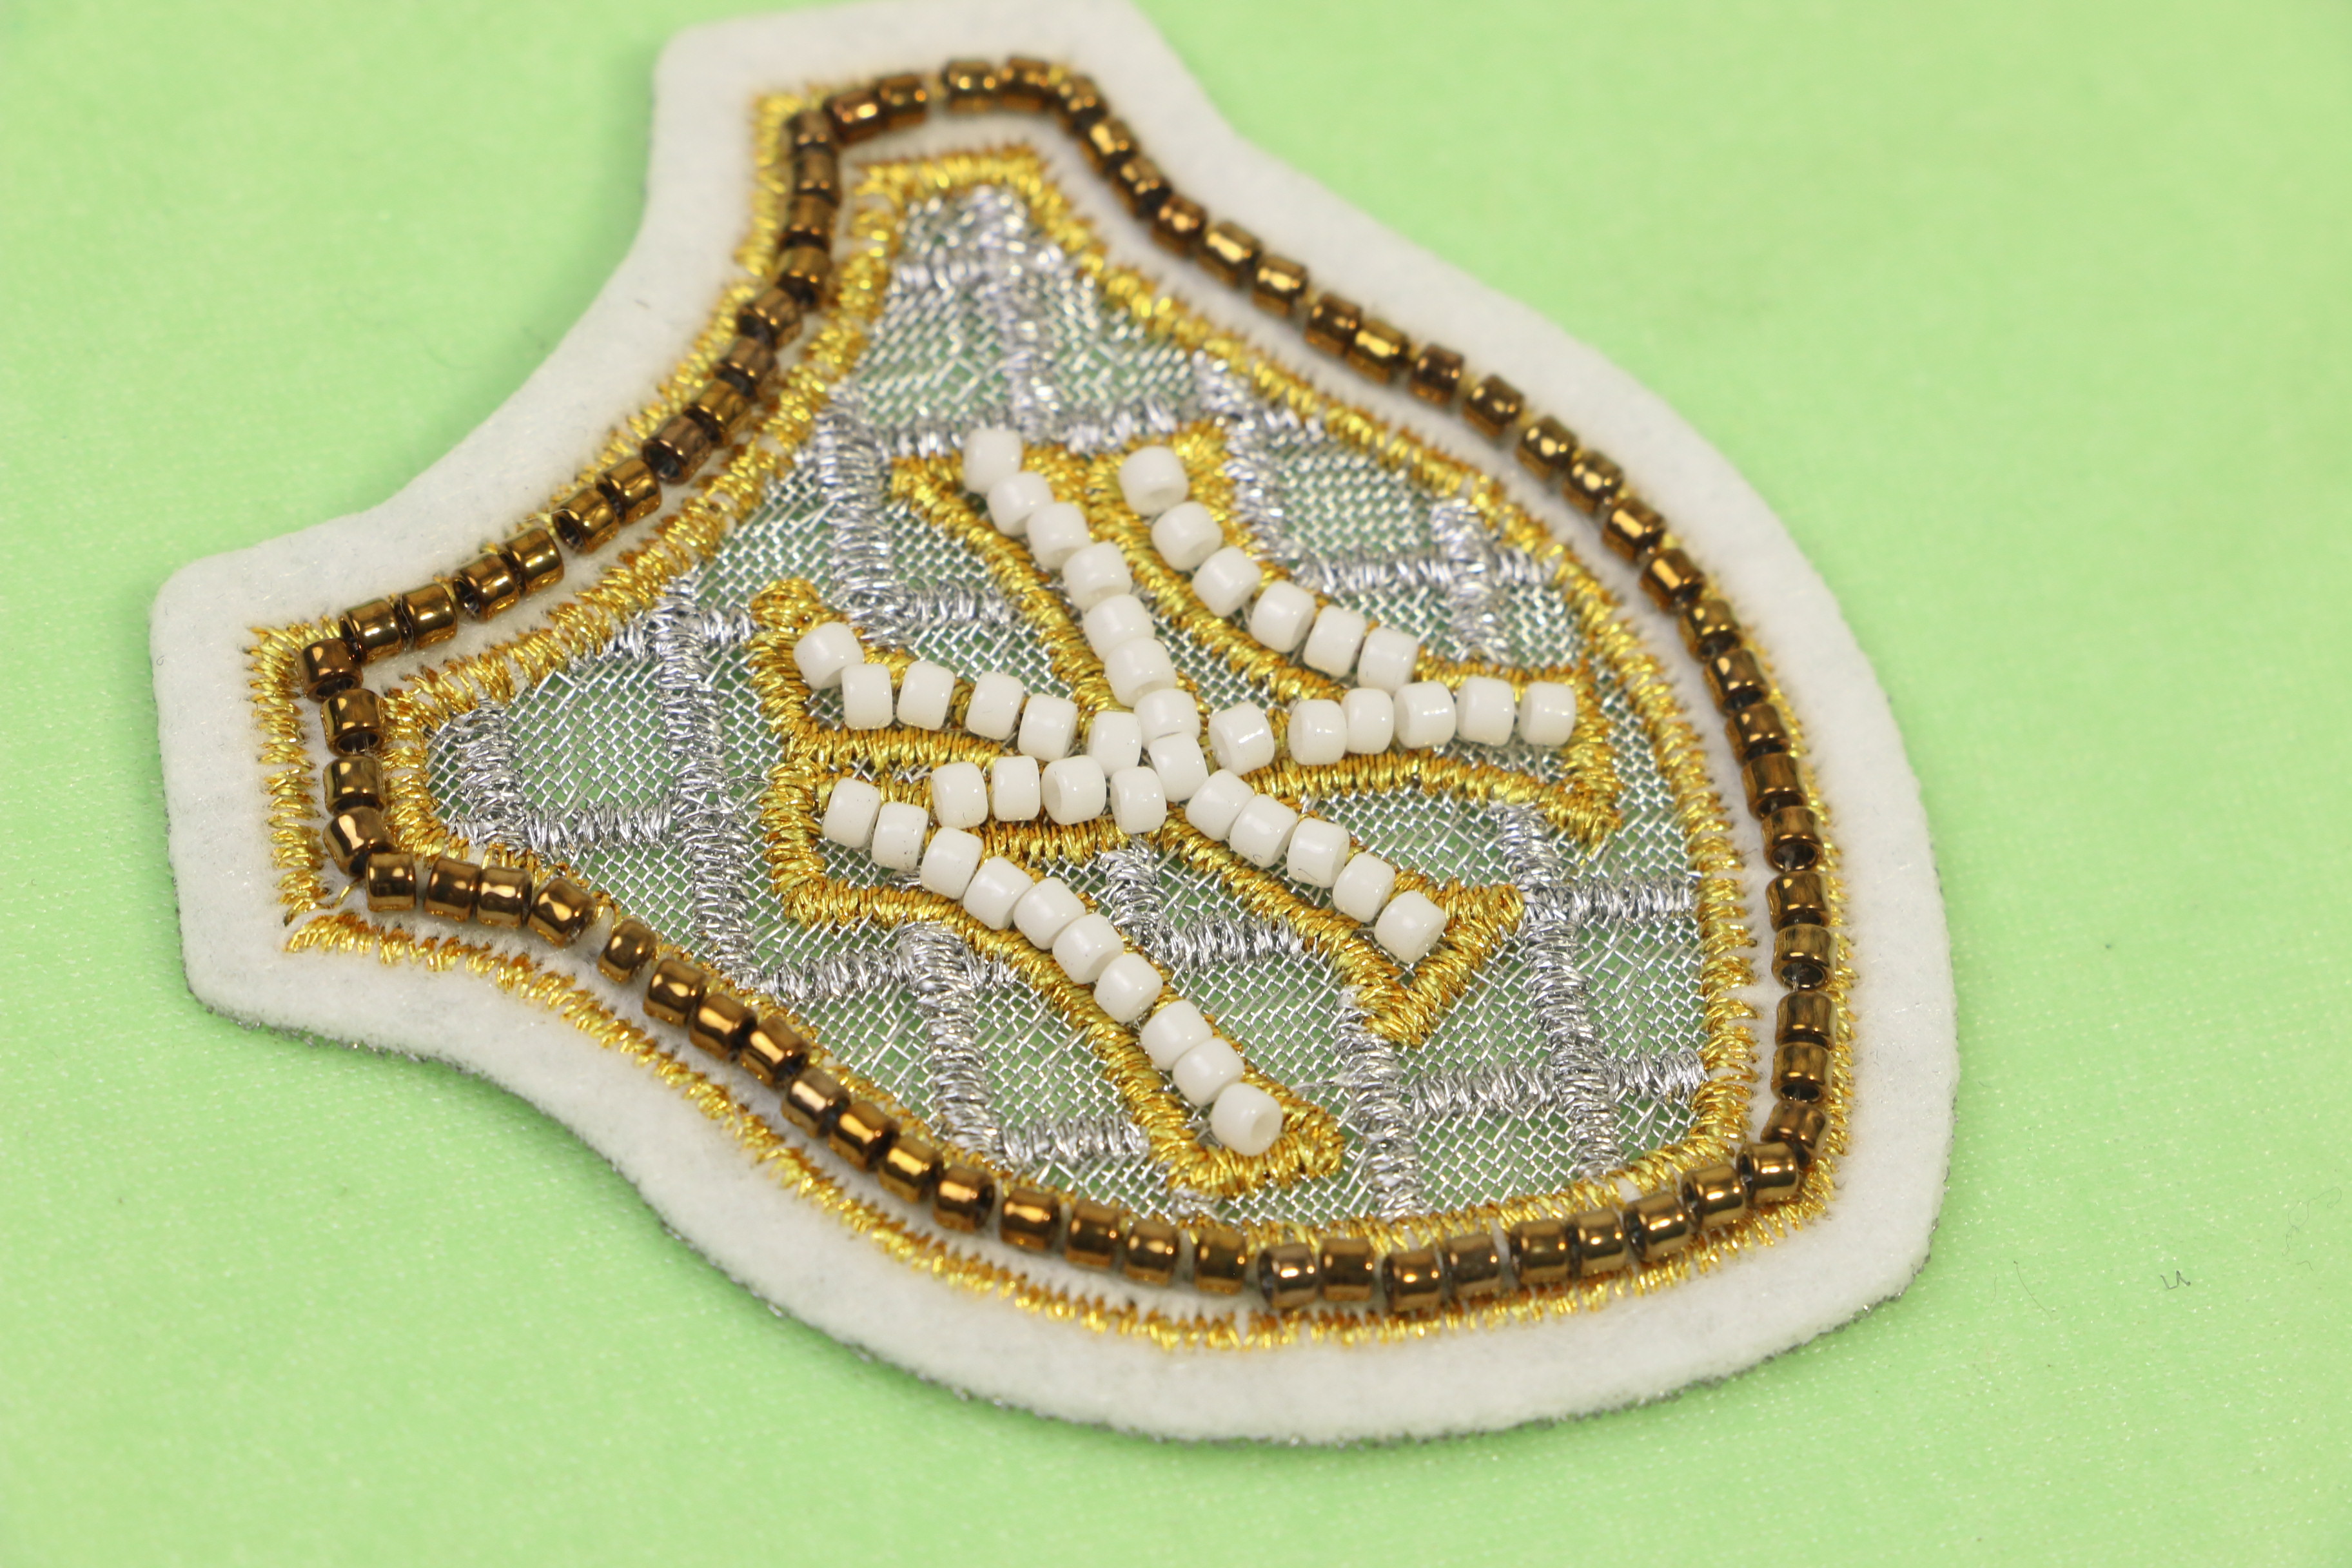  Stylish Silver Gold Metallic Embroidery Badge With White Felt Ground Beads Around For Caps Shoes Manufactures